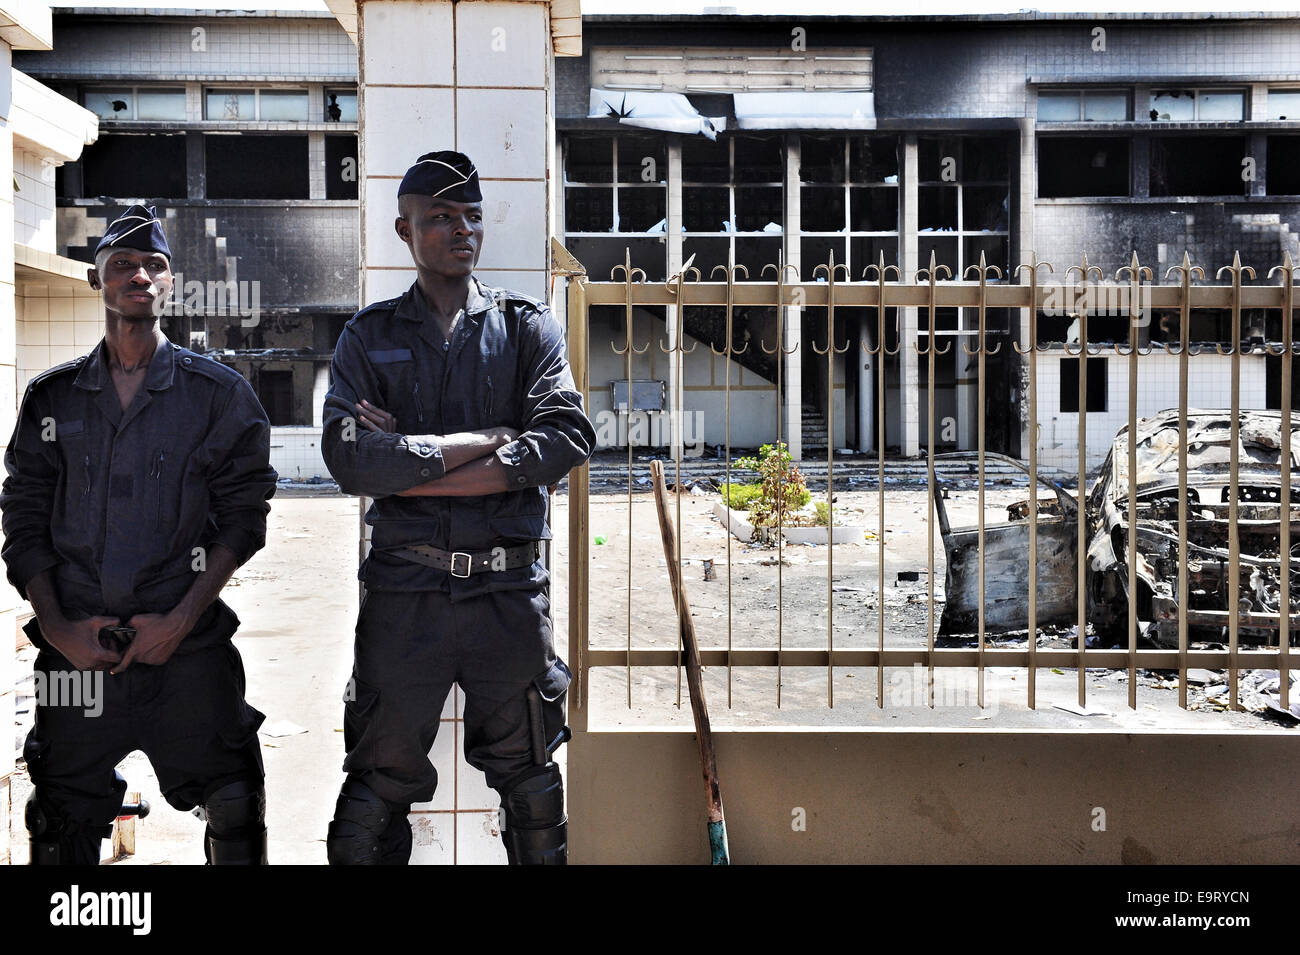 Burkina Faso - political unrest A photo taken on November 1, 2014 shows two soldiers outside the AssemblŽe Nationale (Parliament building)  in Ouagadougou two days after it was stormed by protesters as lawmakers prepared to vote to allow President Blaise Compaore -- who took power in a 1987 coup -- to contest elections in 2015. Stock Photo